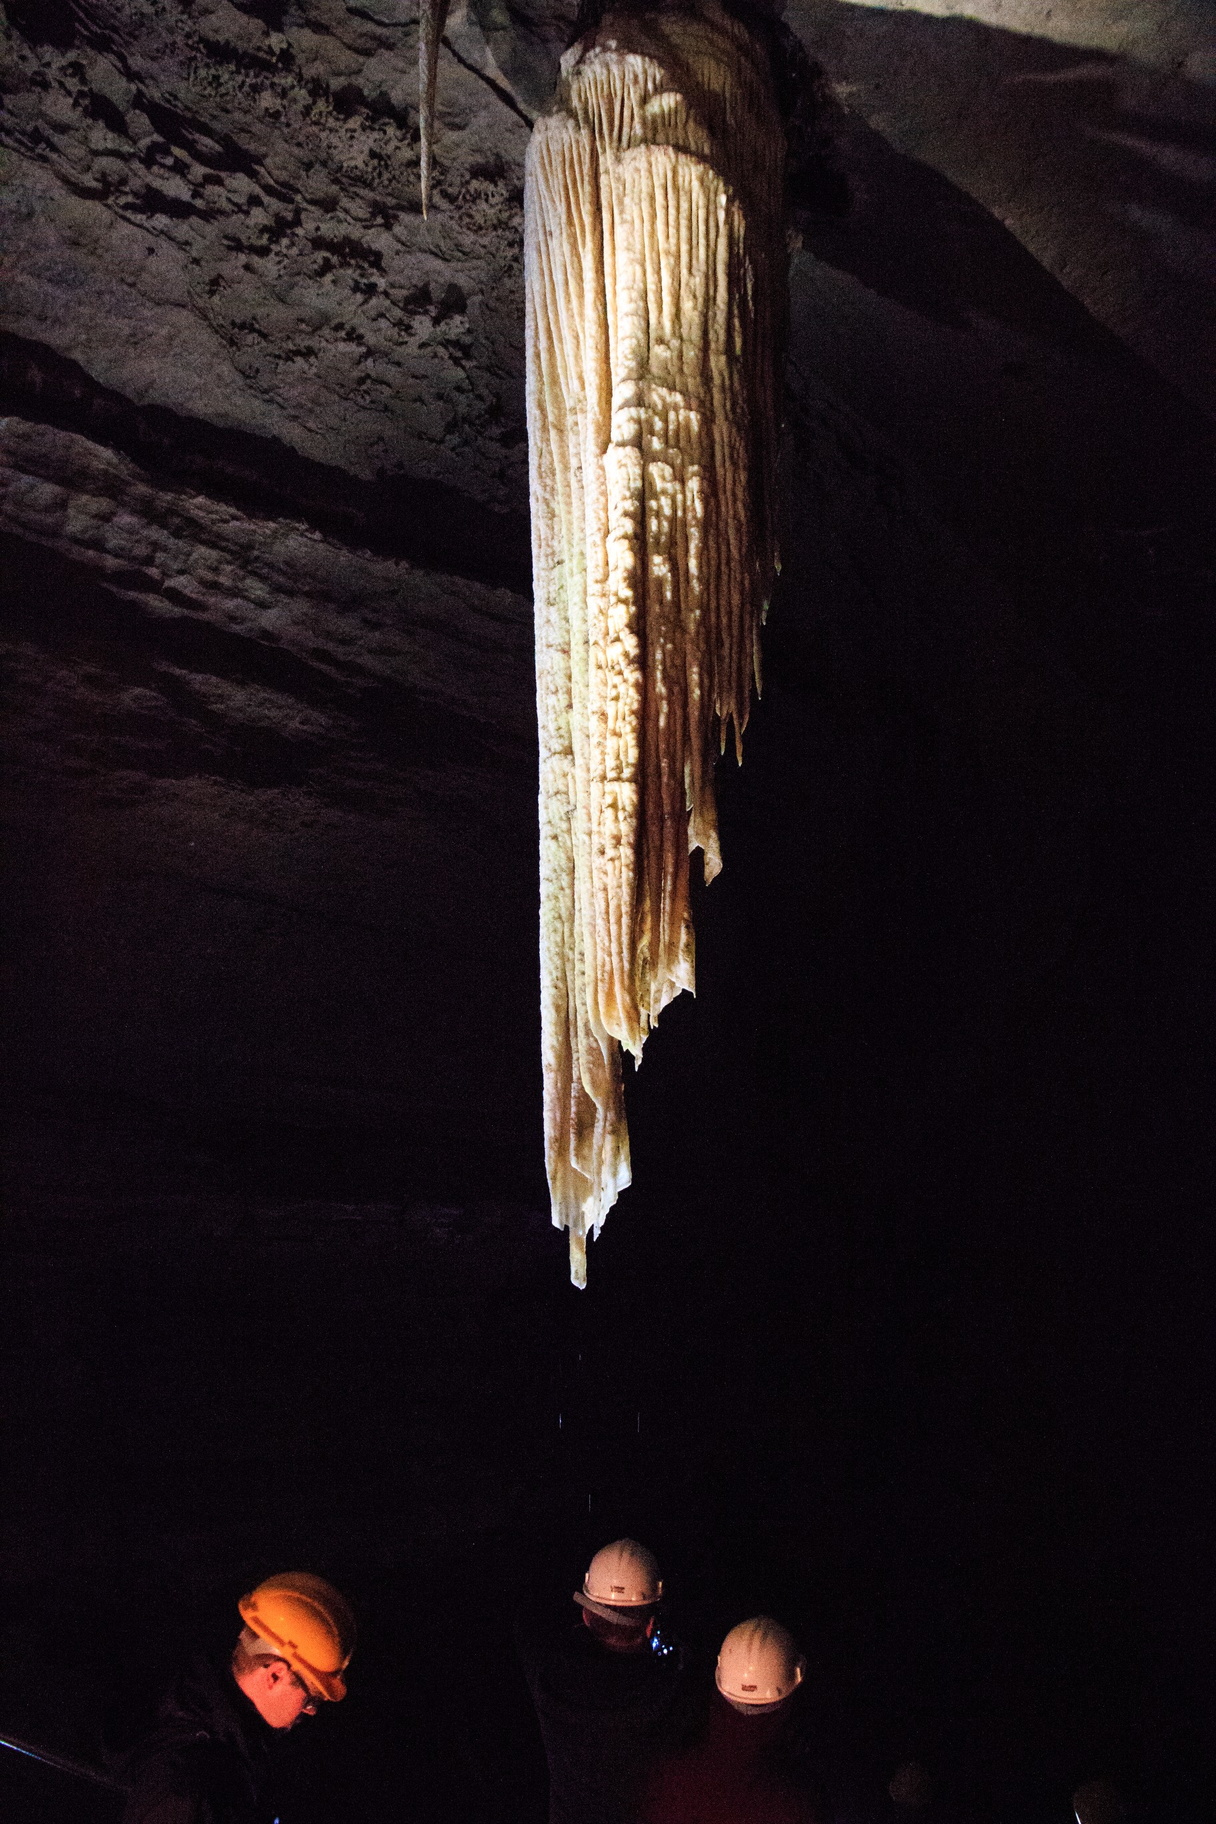 Ireland-0548-The third largest stalactite in the world.